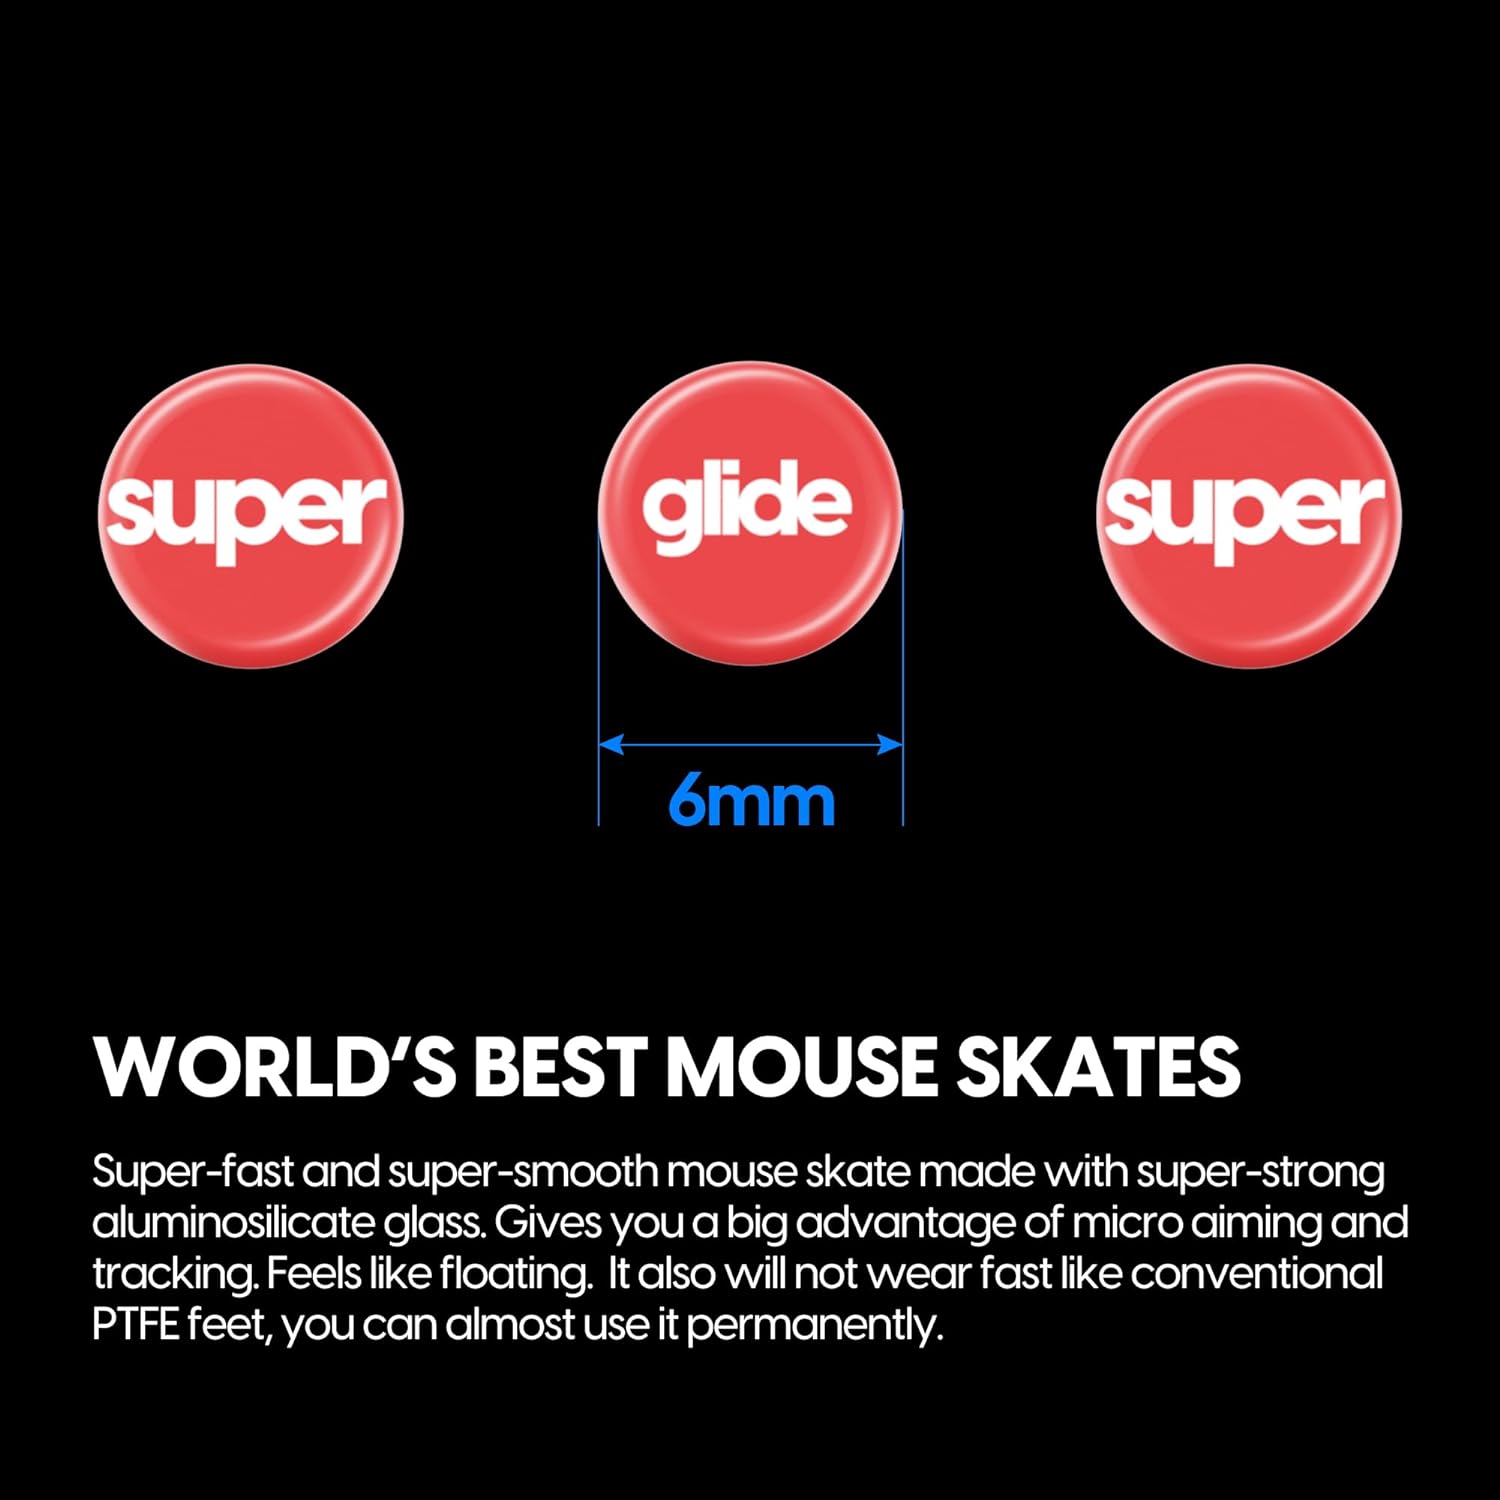 A large marketing image providing additional information about the product Pulsar Superglide 2 Dot Skates for Universal 6mm x 8 - Red - Additional alt info not provided